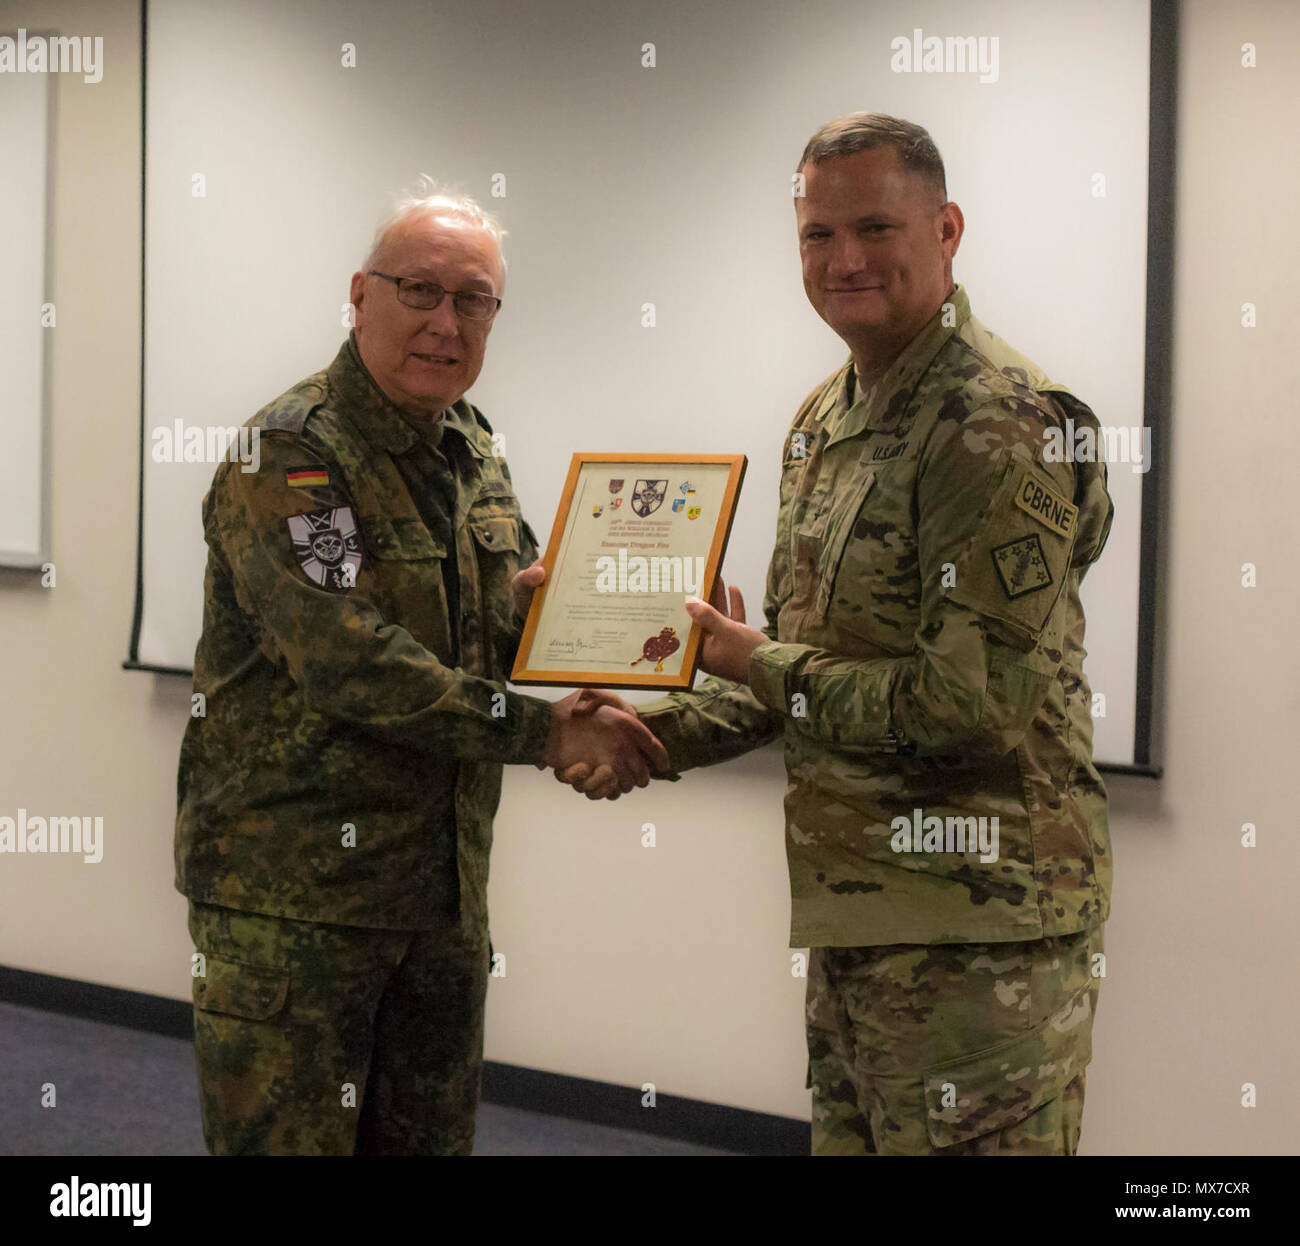 U.S. Army Brig. Gen. William E. King IV, Commander of the 20th CBRNE Command, receives an award from Col. Henry Neumann, Bundeswehr CBRN Commander, Satsop , Wash., May 2, 2017. Dragon fire is a bilateral exercise between the 48th Chemical, Biological, Radiological, and Nuclear (CBRN) Brigade and the German Bundswehr CBRN Defense command. It also serves as the culmination training event and validation exercise for the 22nd CBRN Battalion. Stock Photo